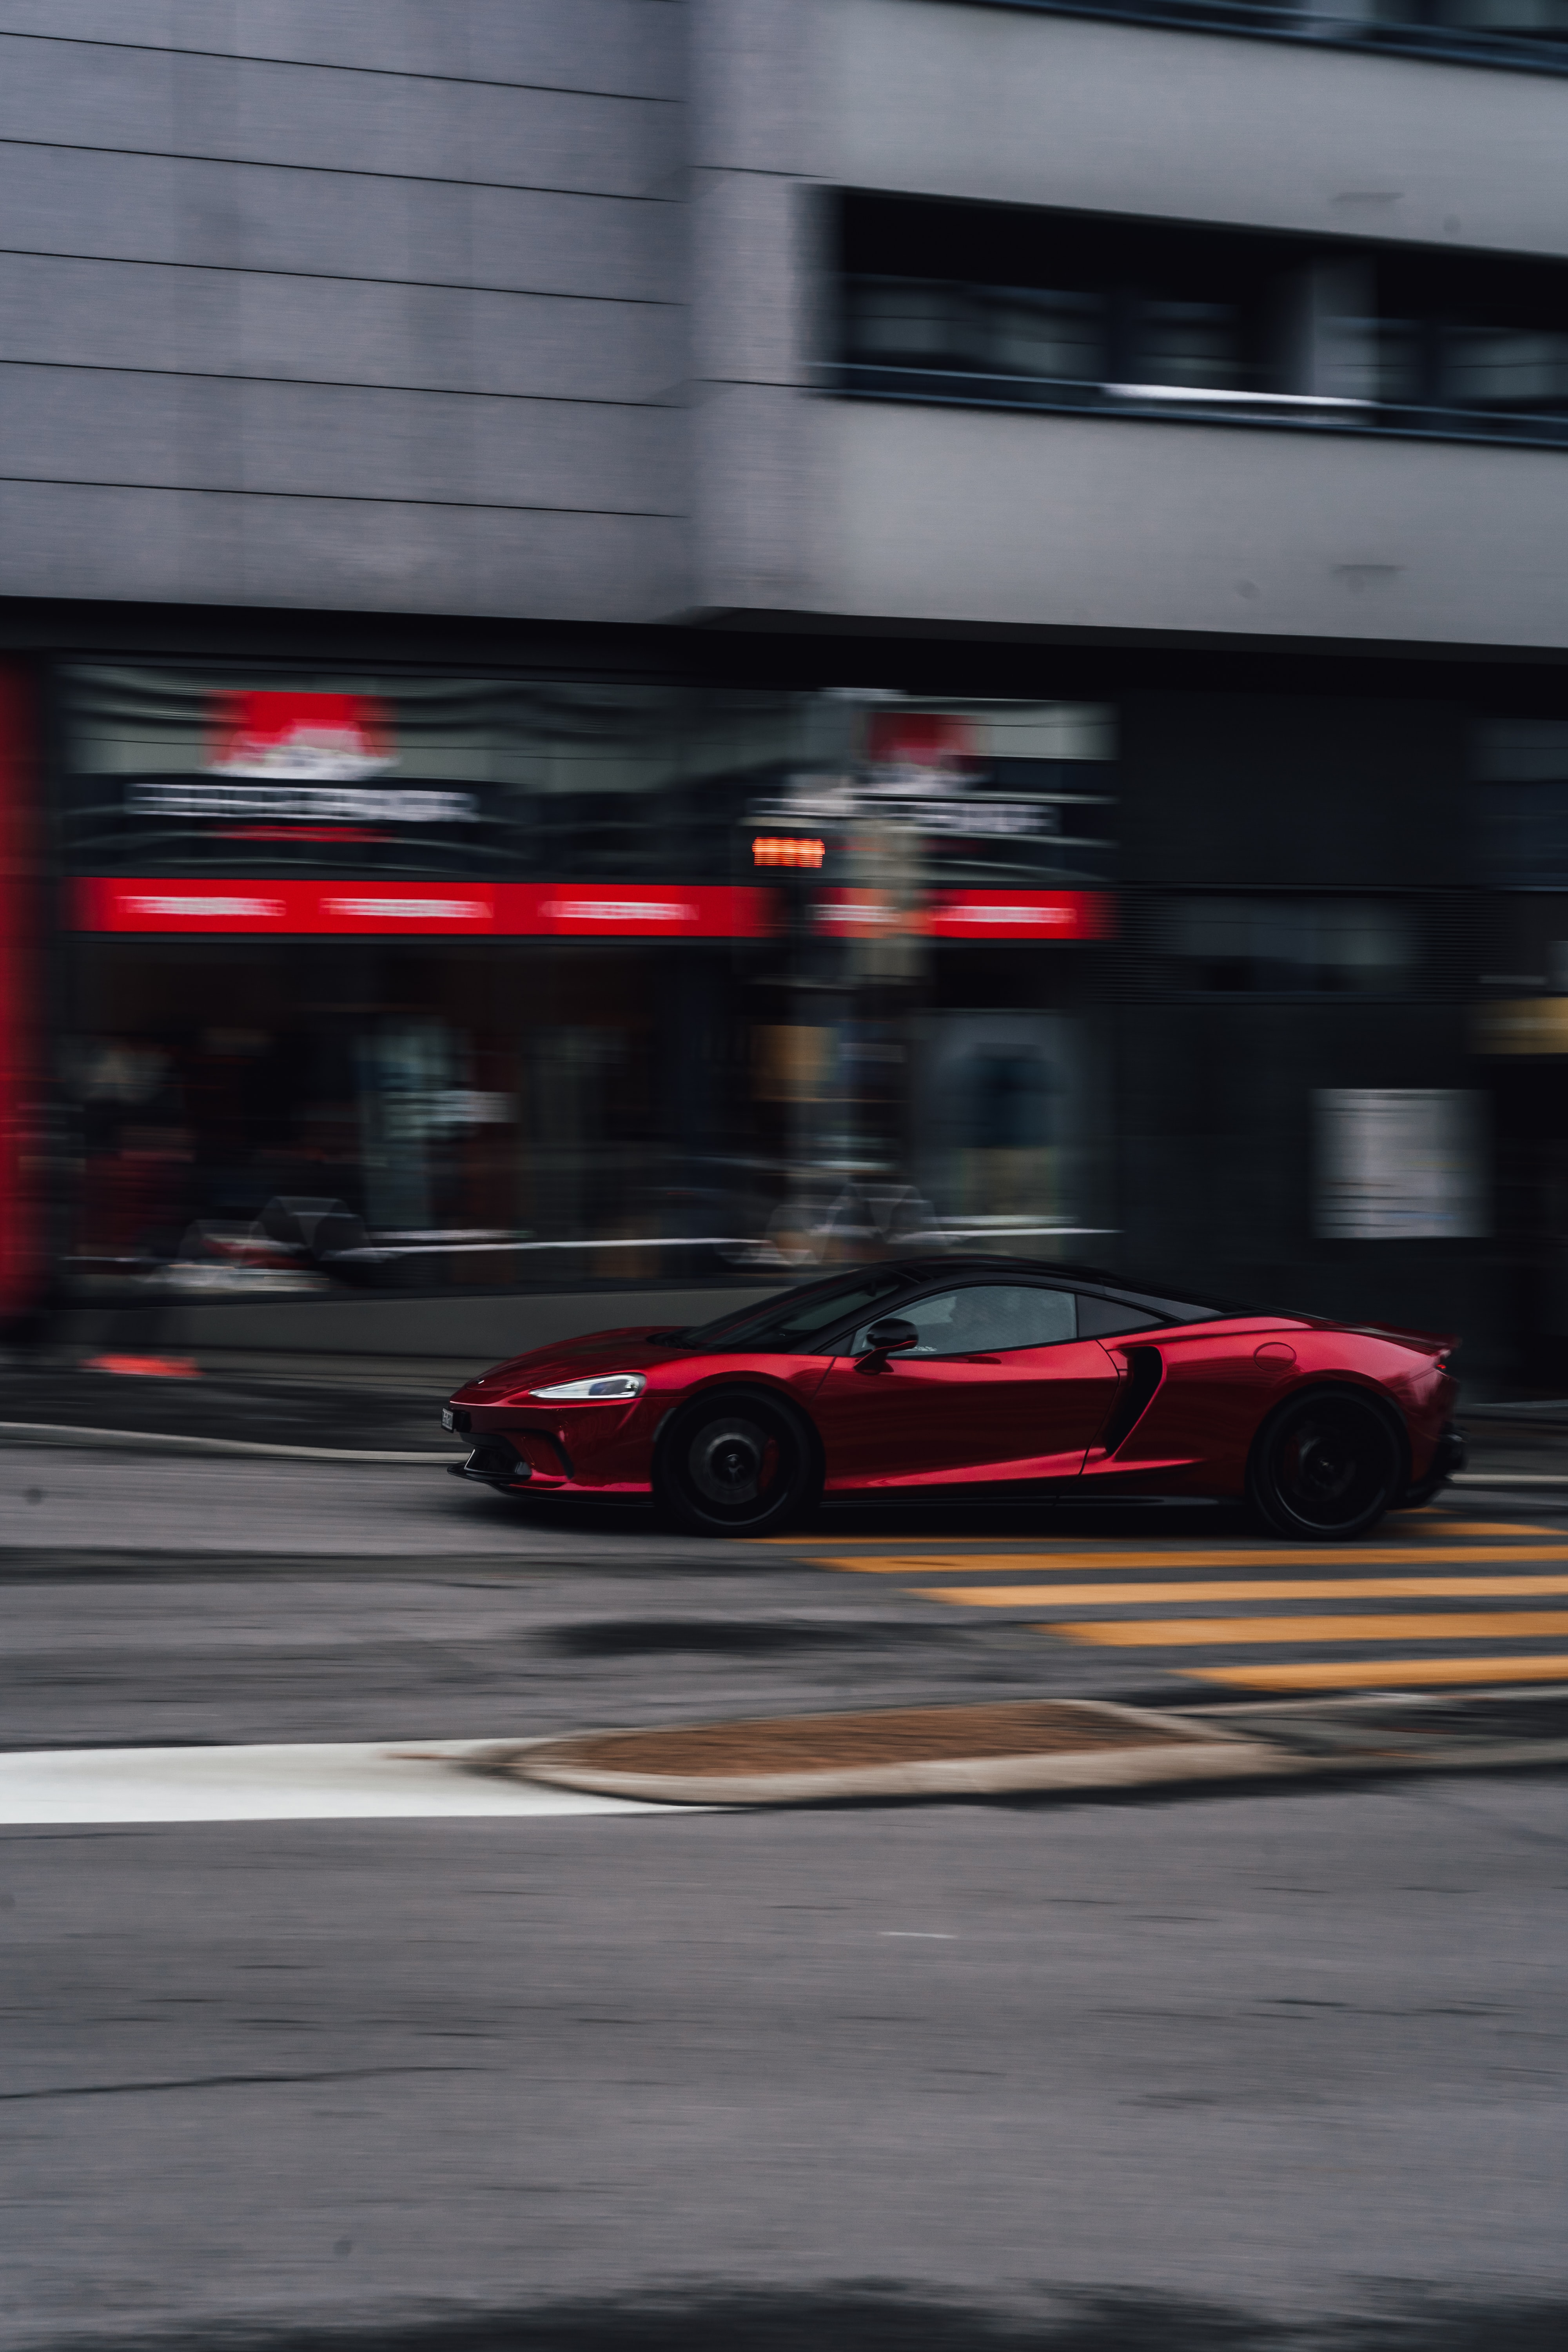 android speed, supercar, cars, sports, red, car, sports car, street